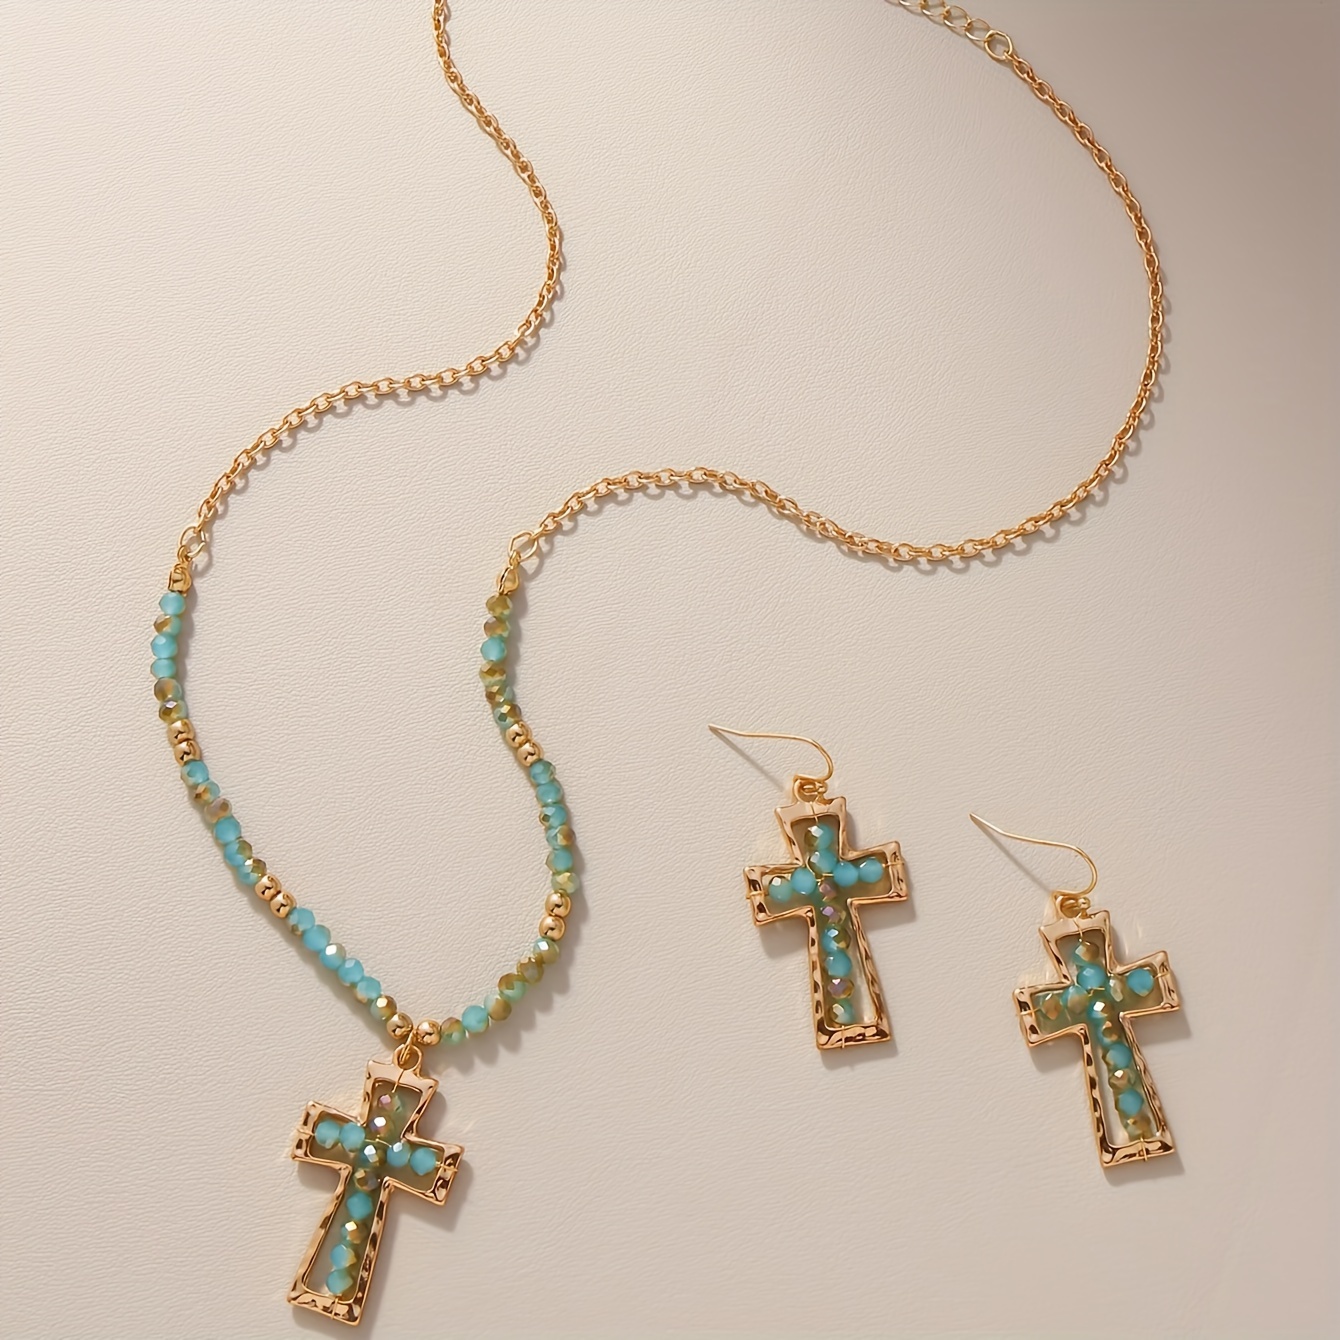 

3pcs/set Elegant Faux Turquoise Blue Beaded Necklace With Cross Pendant & Earrings, Simple Bohemian Vacation Style, Adjustable Chain Jewelry Set